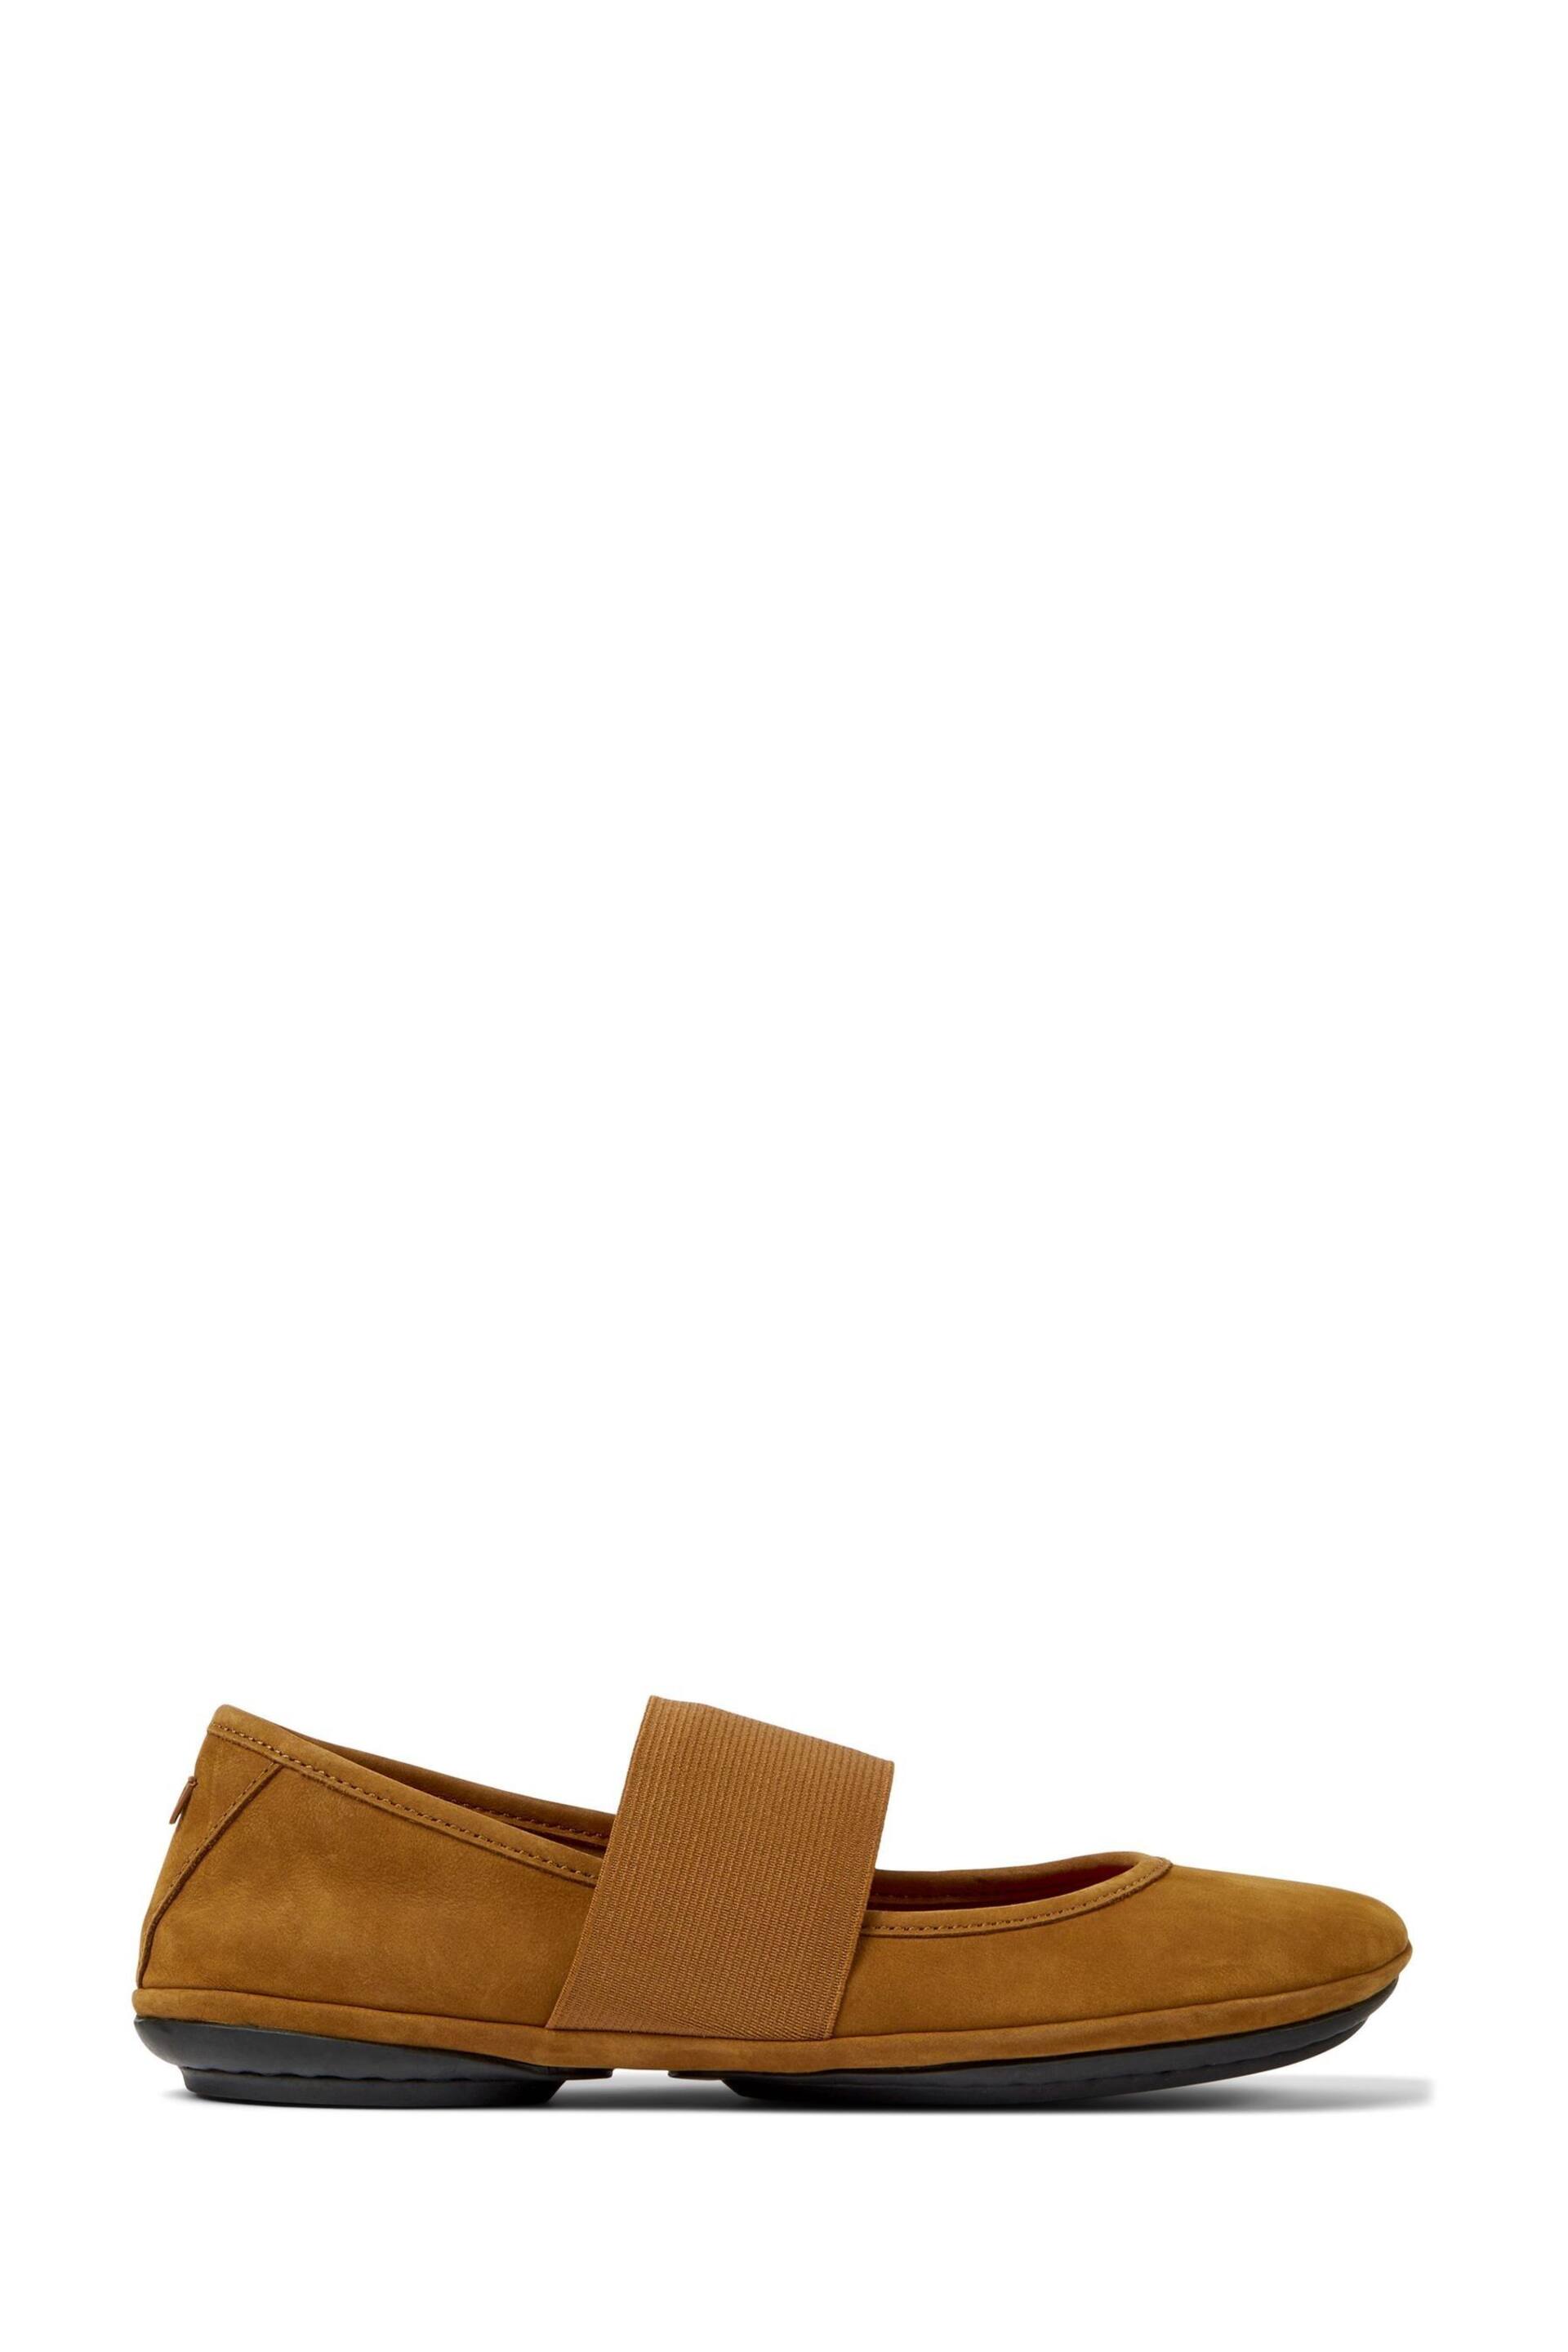 Camper Womens Mary Jane Brown Shoes - Image 1 of 5